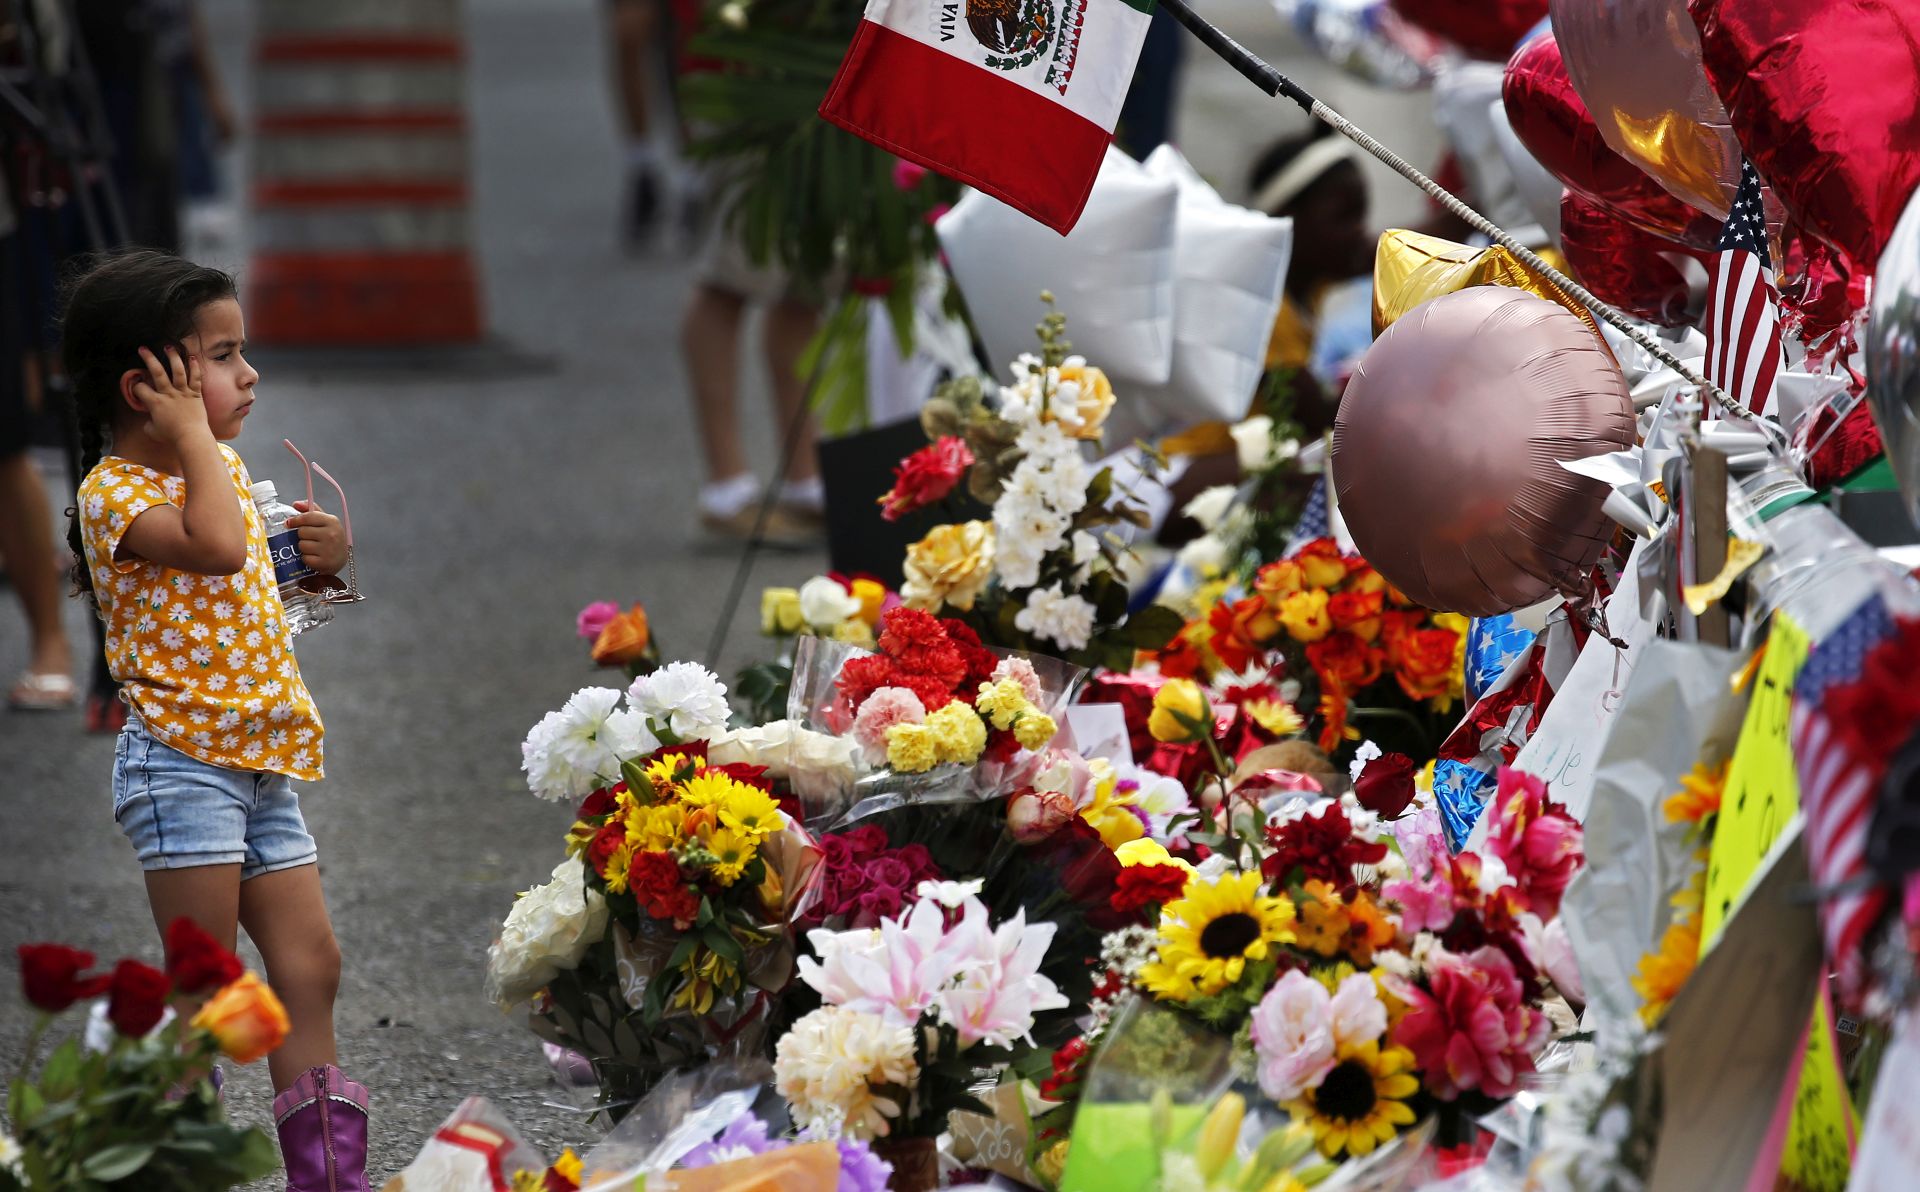 epa07759594 A little girl pauses to look at flowers at the make shift memorial after the mass shooting that happened at a Walmart in El Paso, Texas, 06 August 2019. Twenty two people were killed and 26 injured during a mass shooting at the Walmart on 03 August 2019. Prosecutors said they will seek the death penalty against Patrick Crusius, a 21-year-old man, accused of the mass shooting.  EPA/LARRY W. SMITH